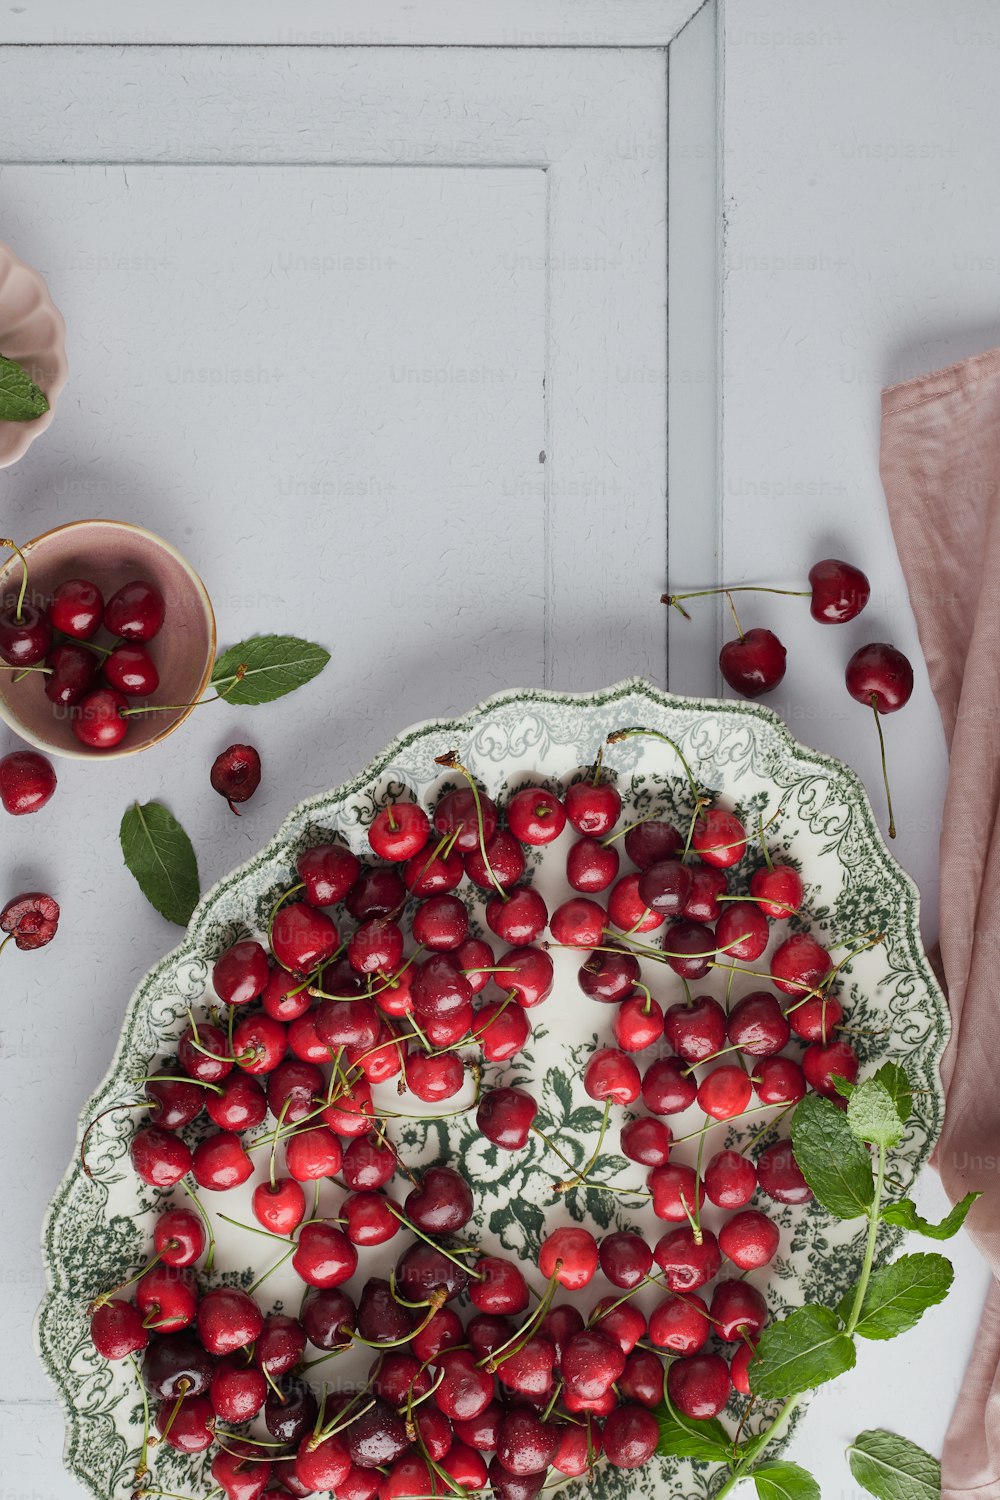 a plate of cherries on a table